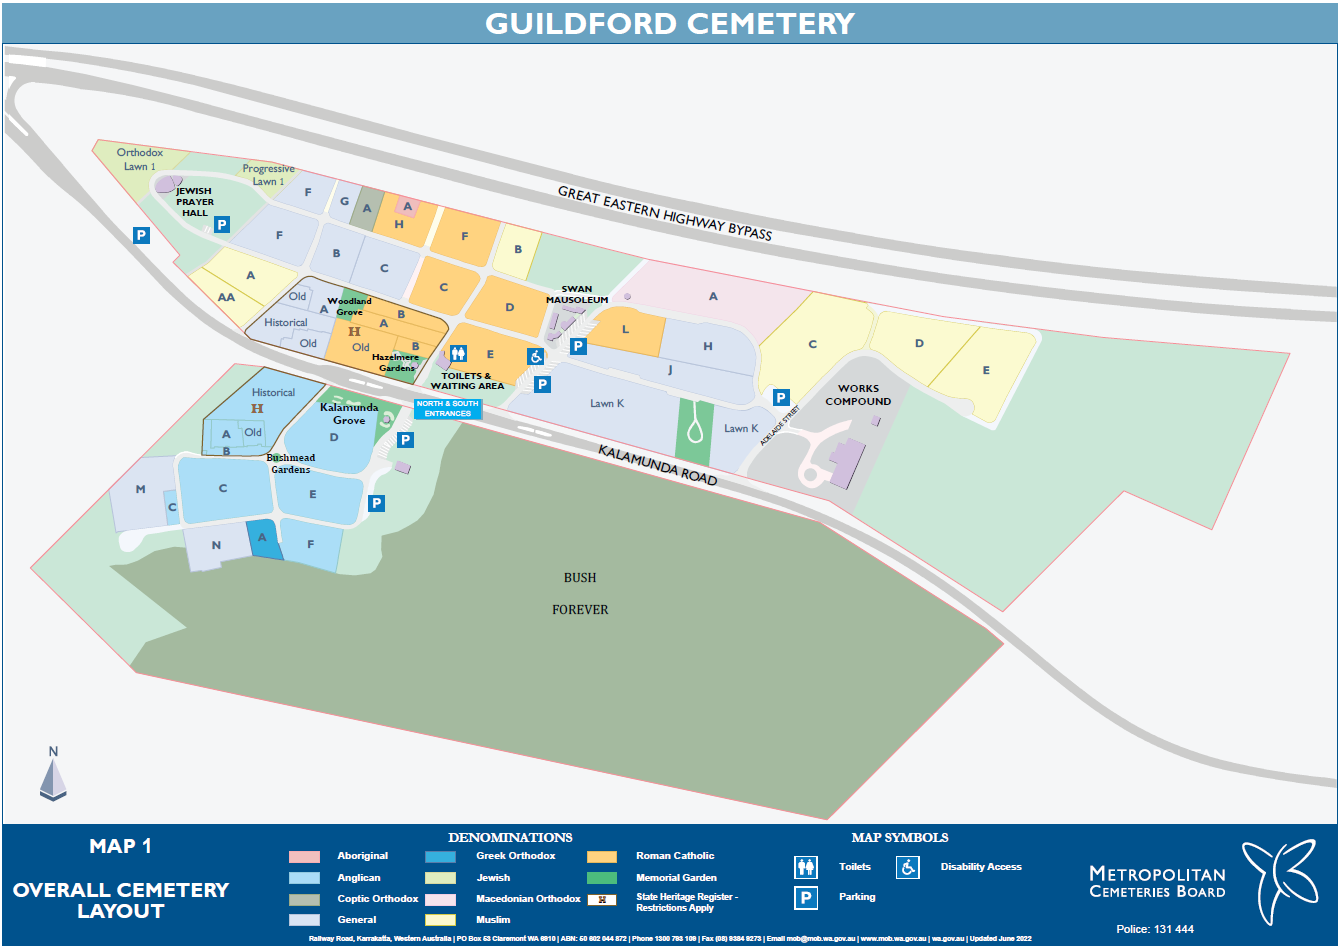 Guildford Cemetery overall map showing all the sections of the cemetery